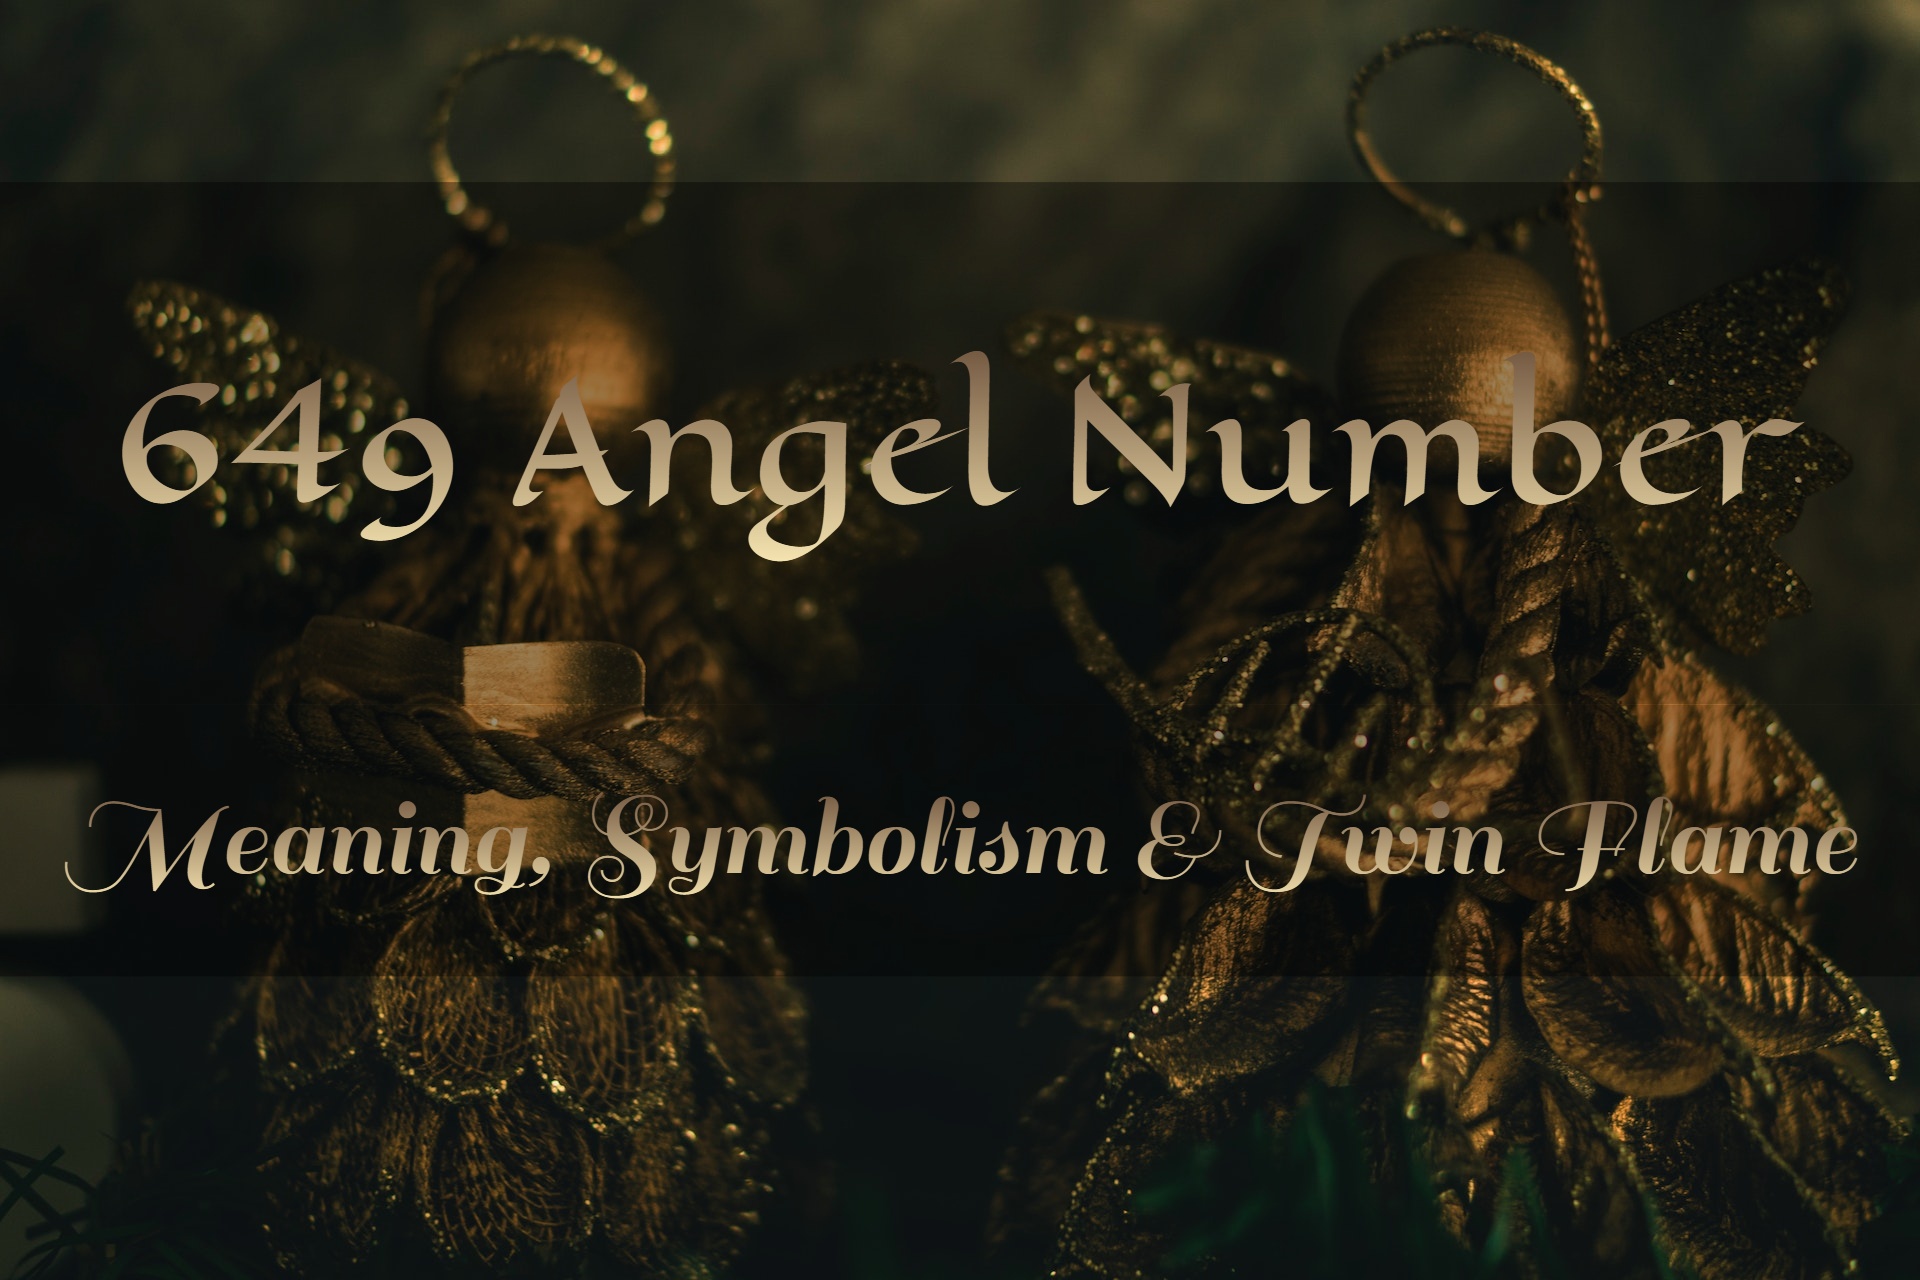 649 Angel Number - Meaning, Symbolism & Twin Flame